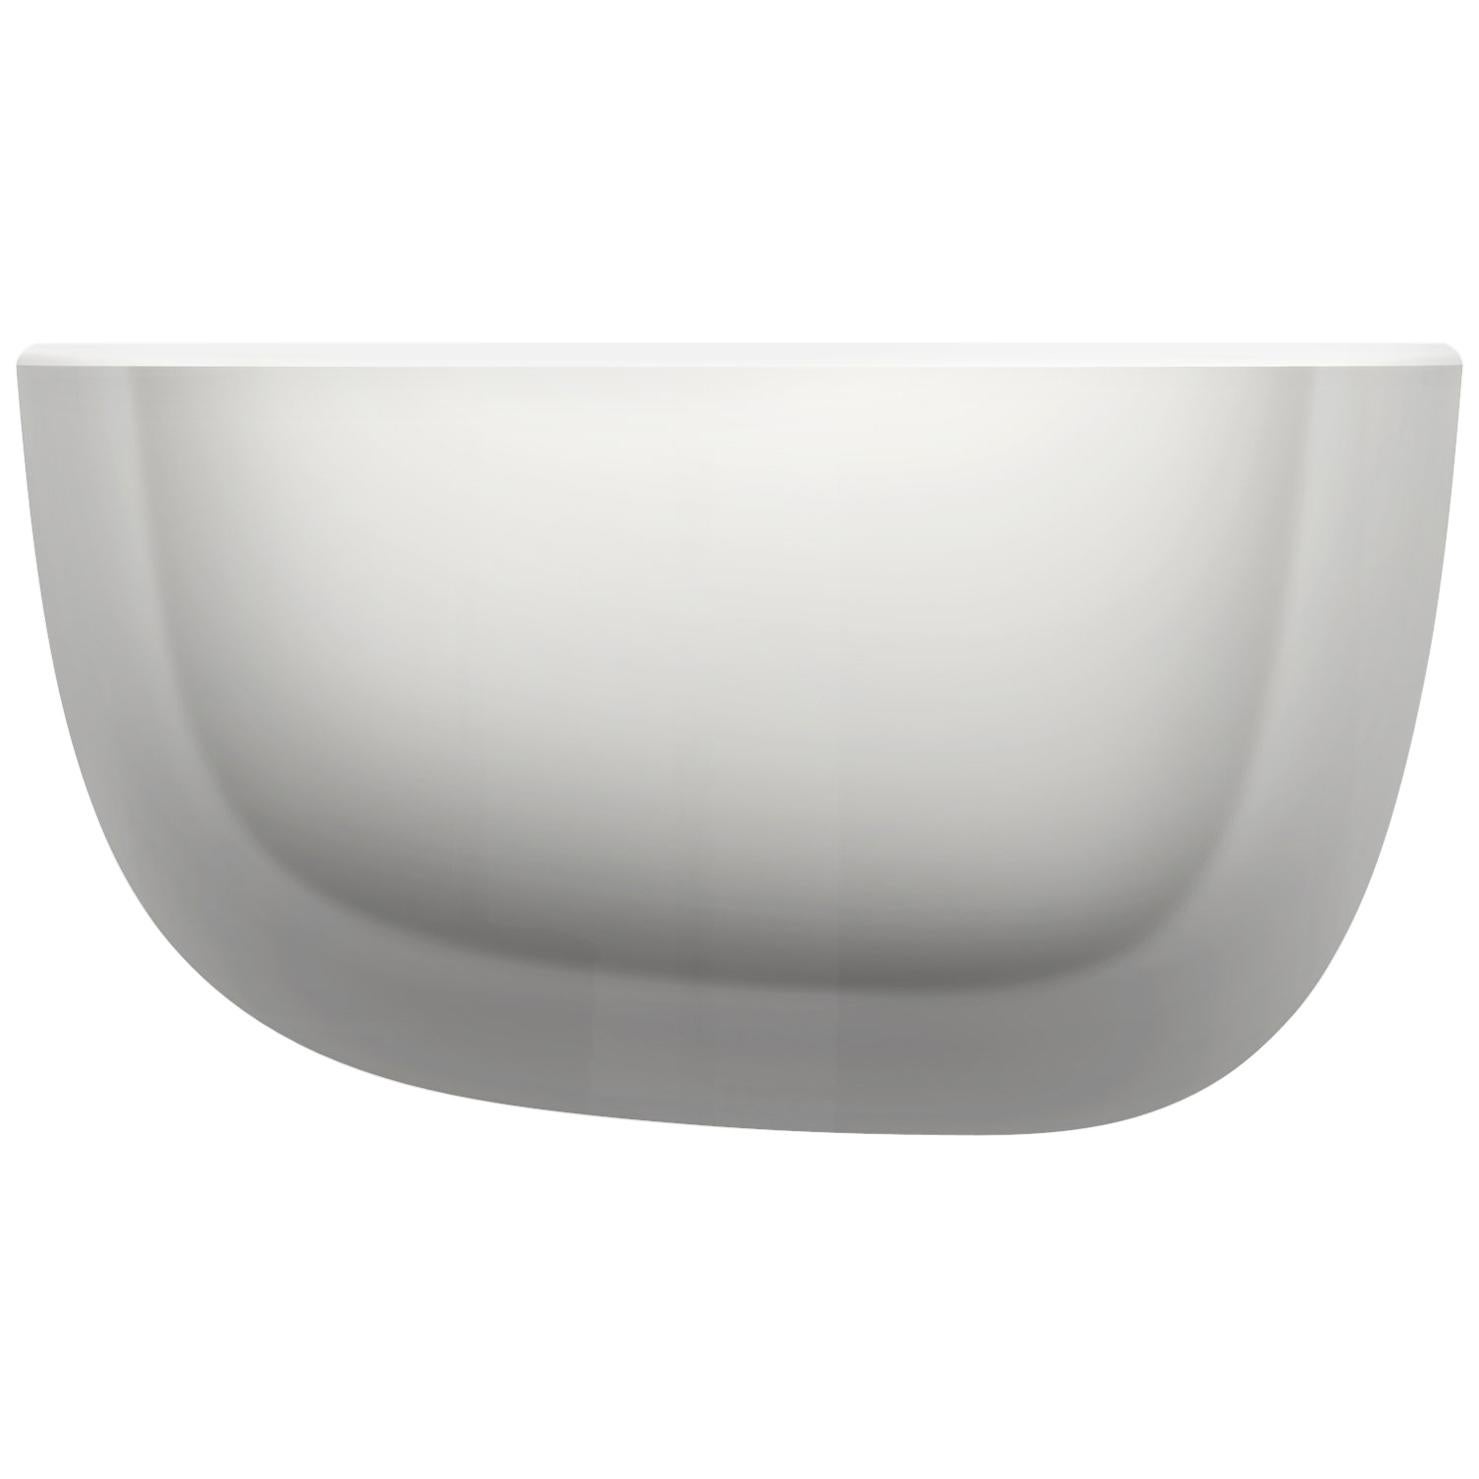 Vitra Small Corniches in White by Ronan & Erwan Bouroullec im Angebot